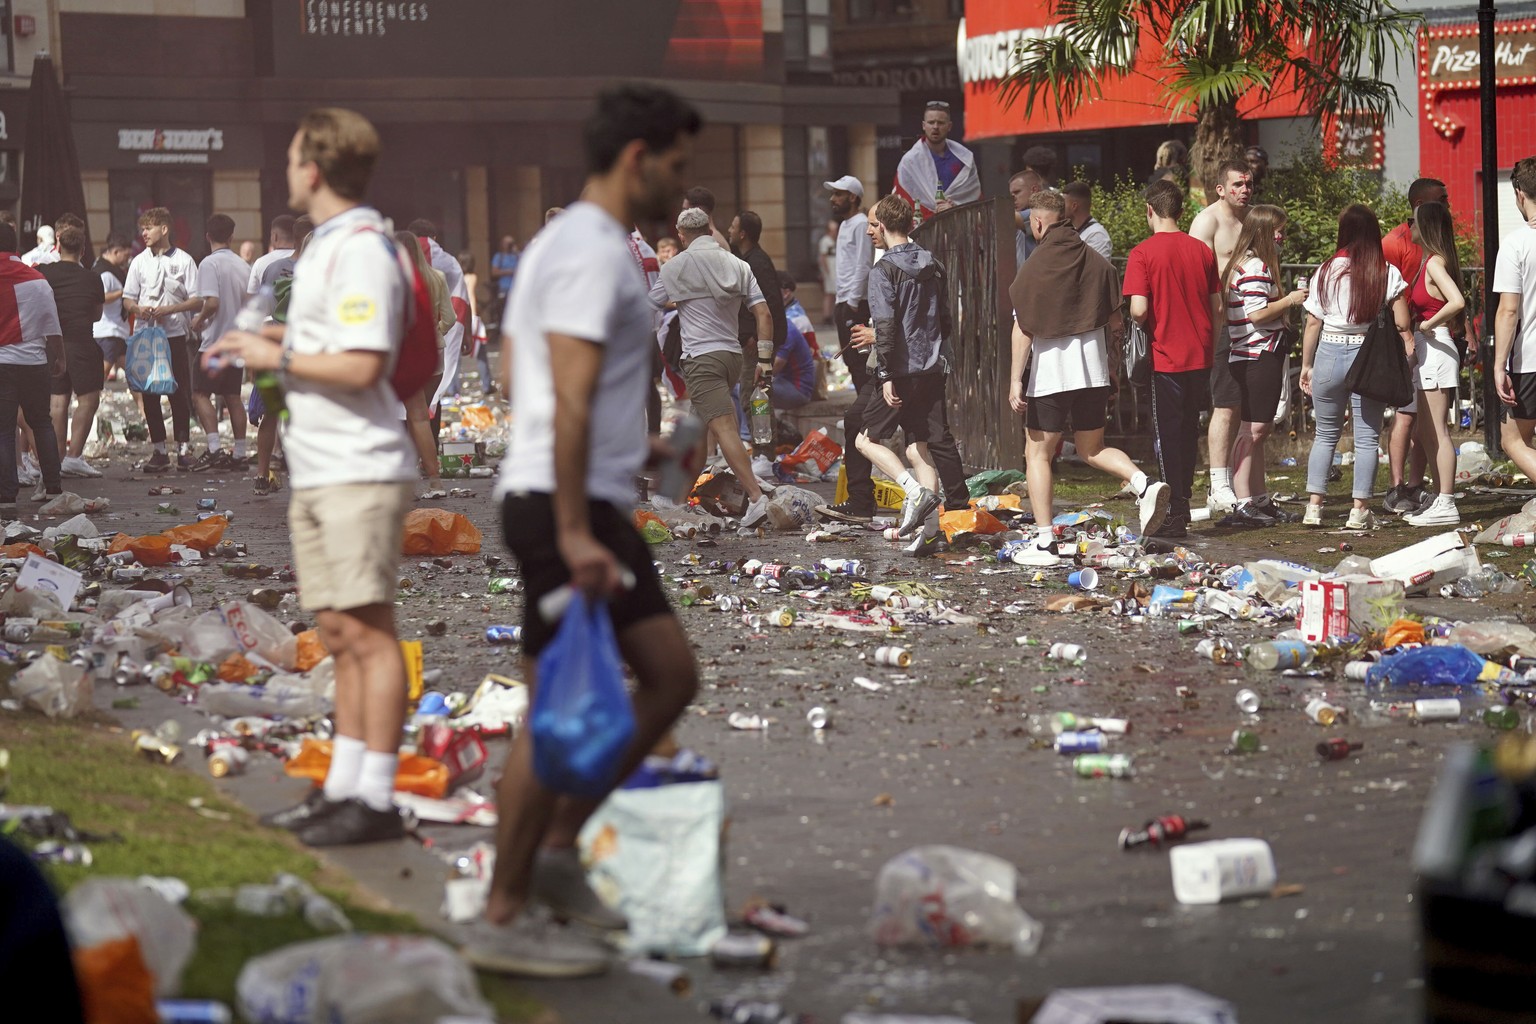 Piles of rubbish left behind by partying England fans in Leicester Square central London, Sunday July 11, 2021, ahead of the Euro 2020 soccer championship final match between England and Italy, at Wem ...